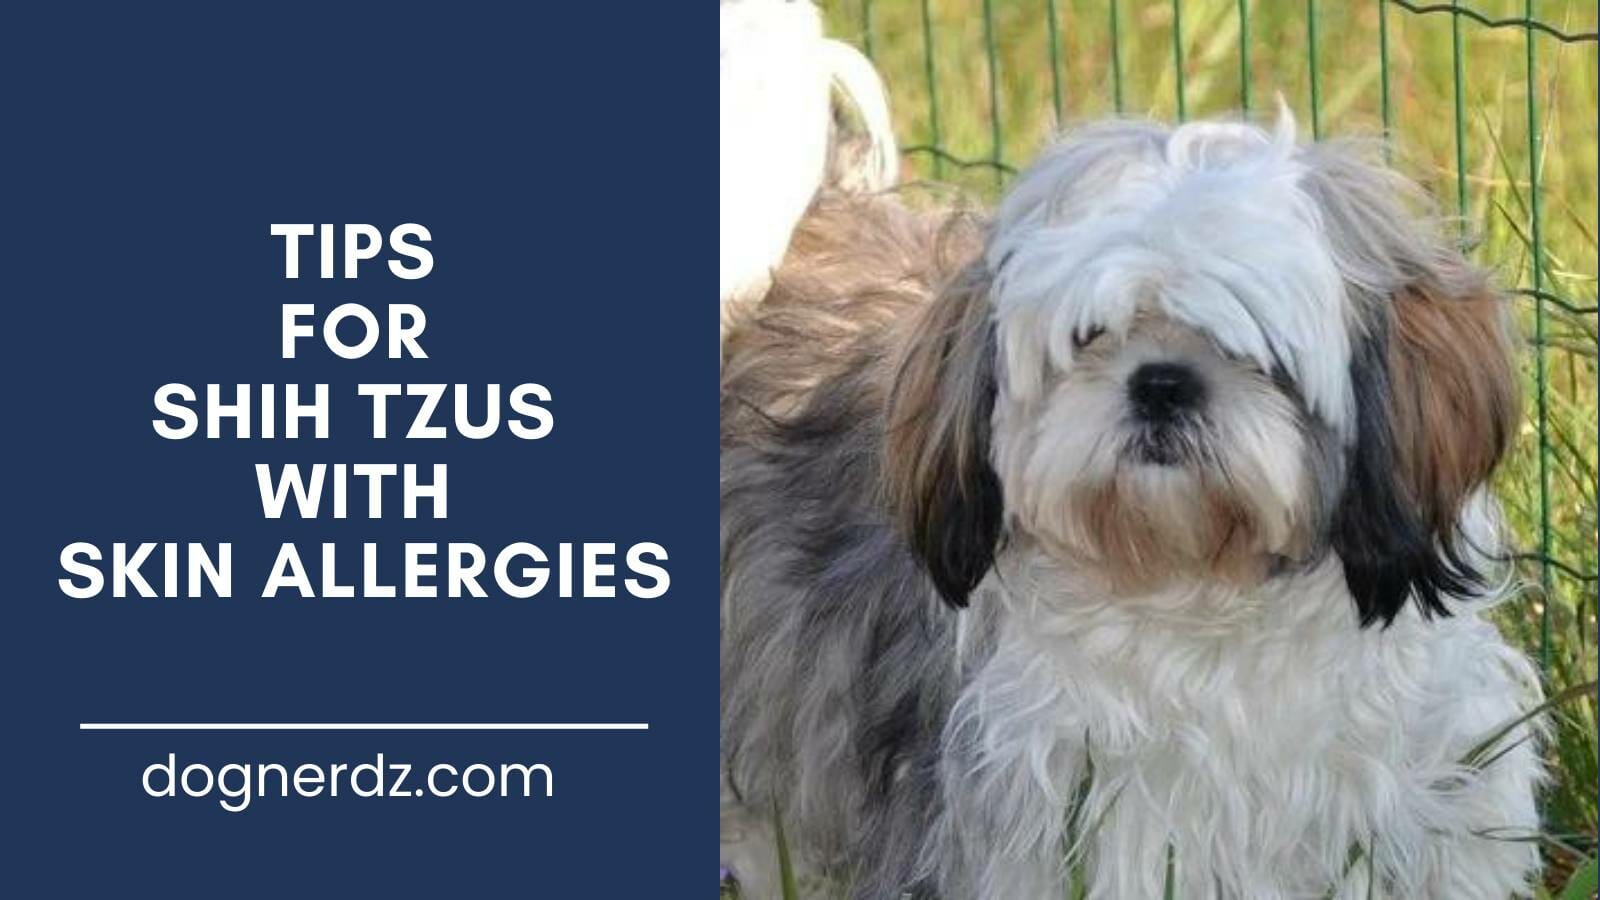 guide on tips for shih tzus with skin allergies